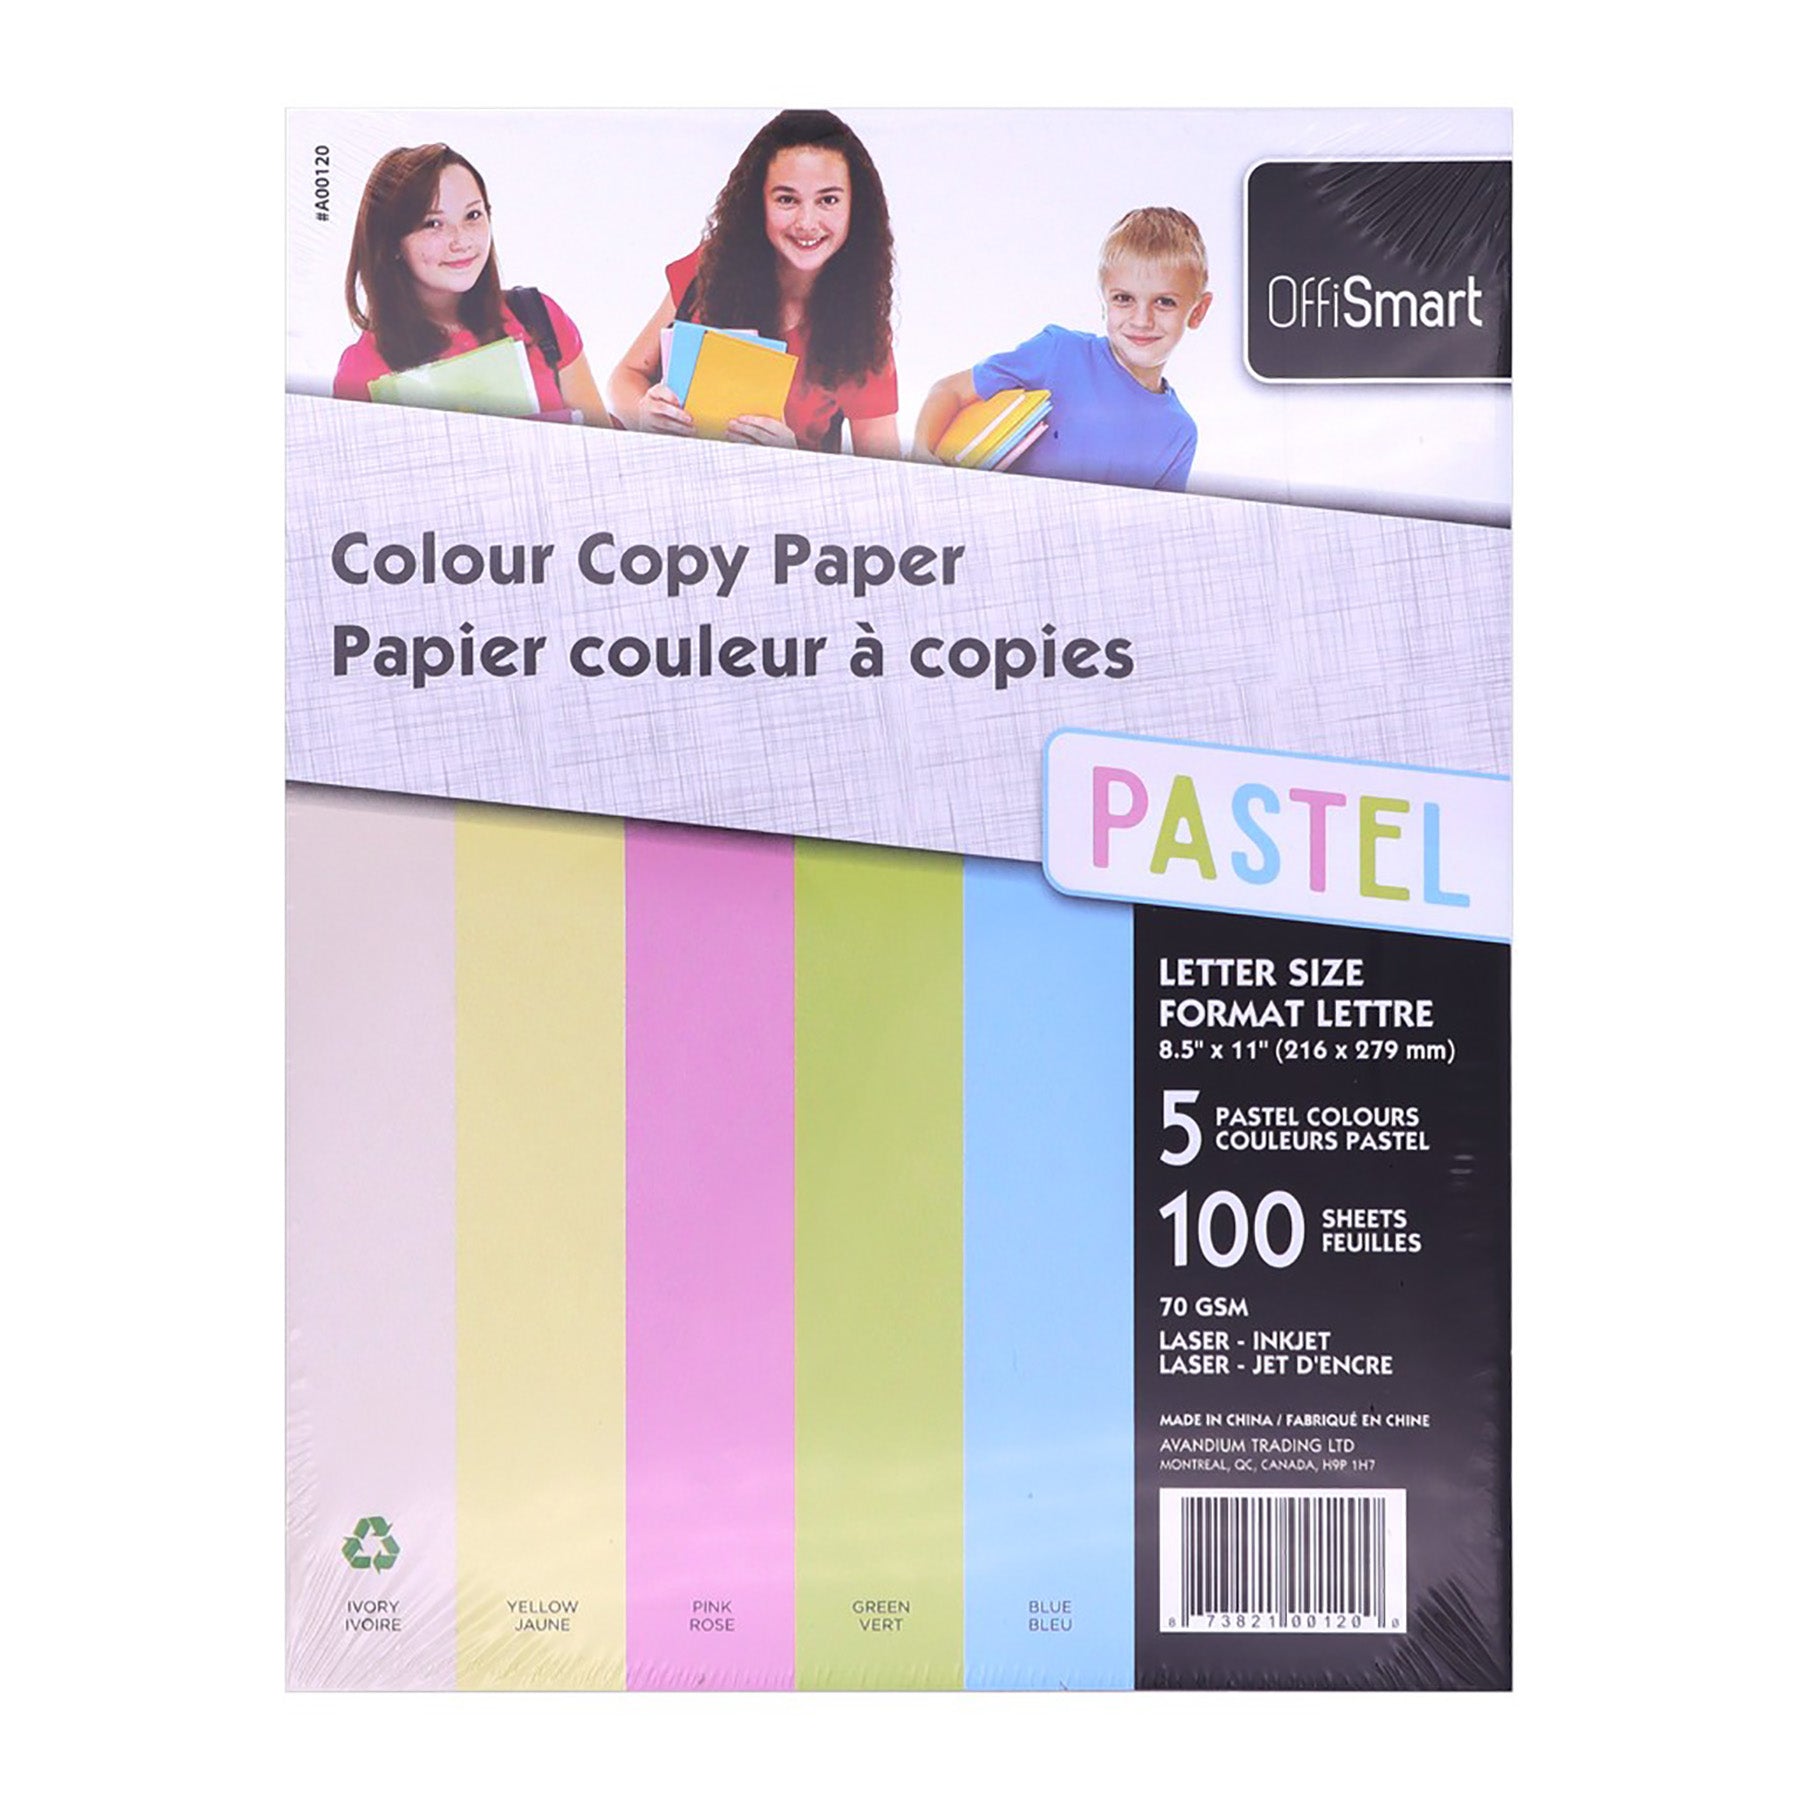 Offismart 100 Sheets Printing Paper 5 Pastel Colors 8.5x11in